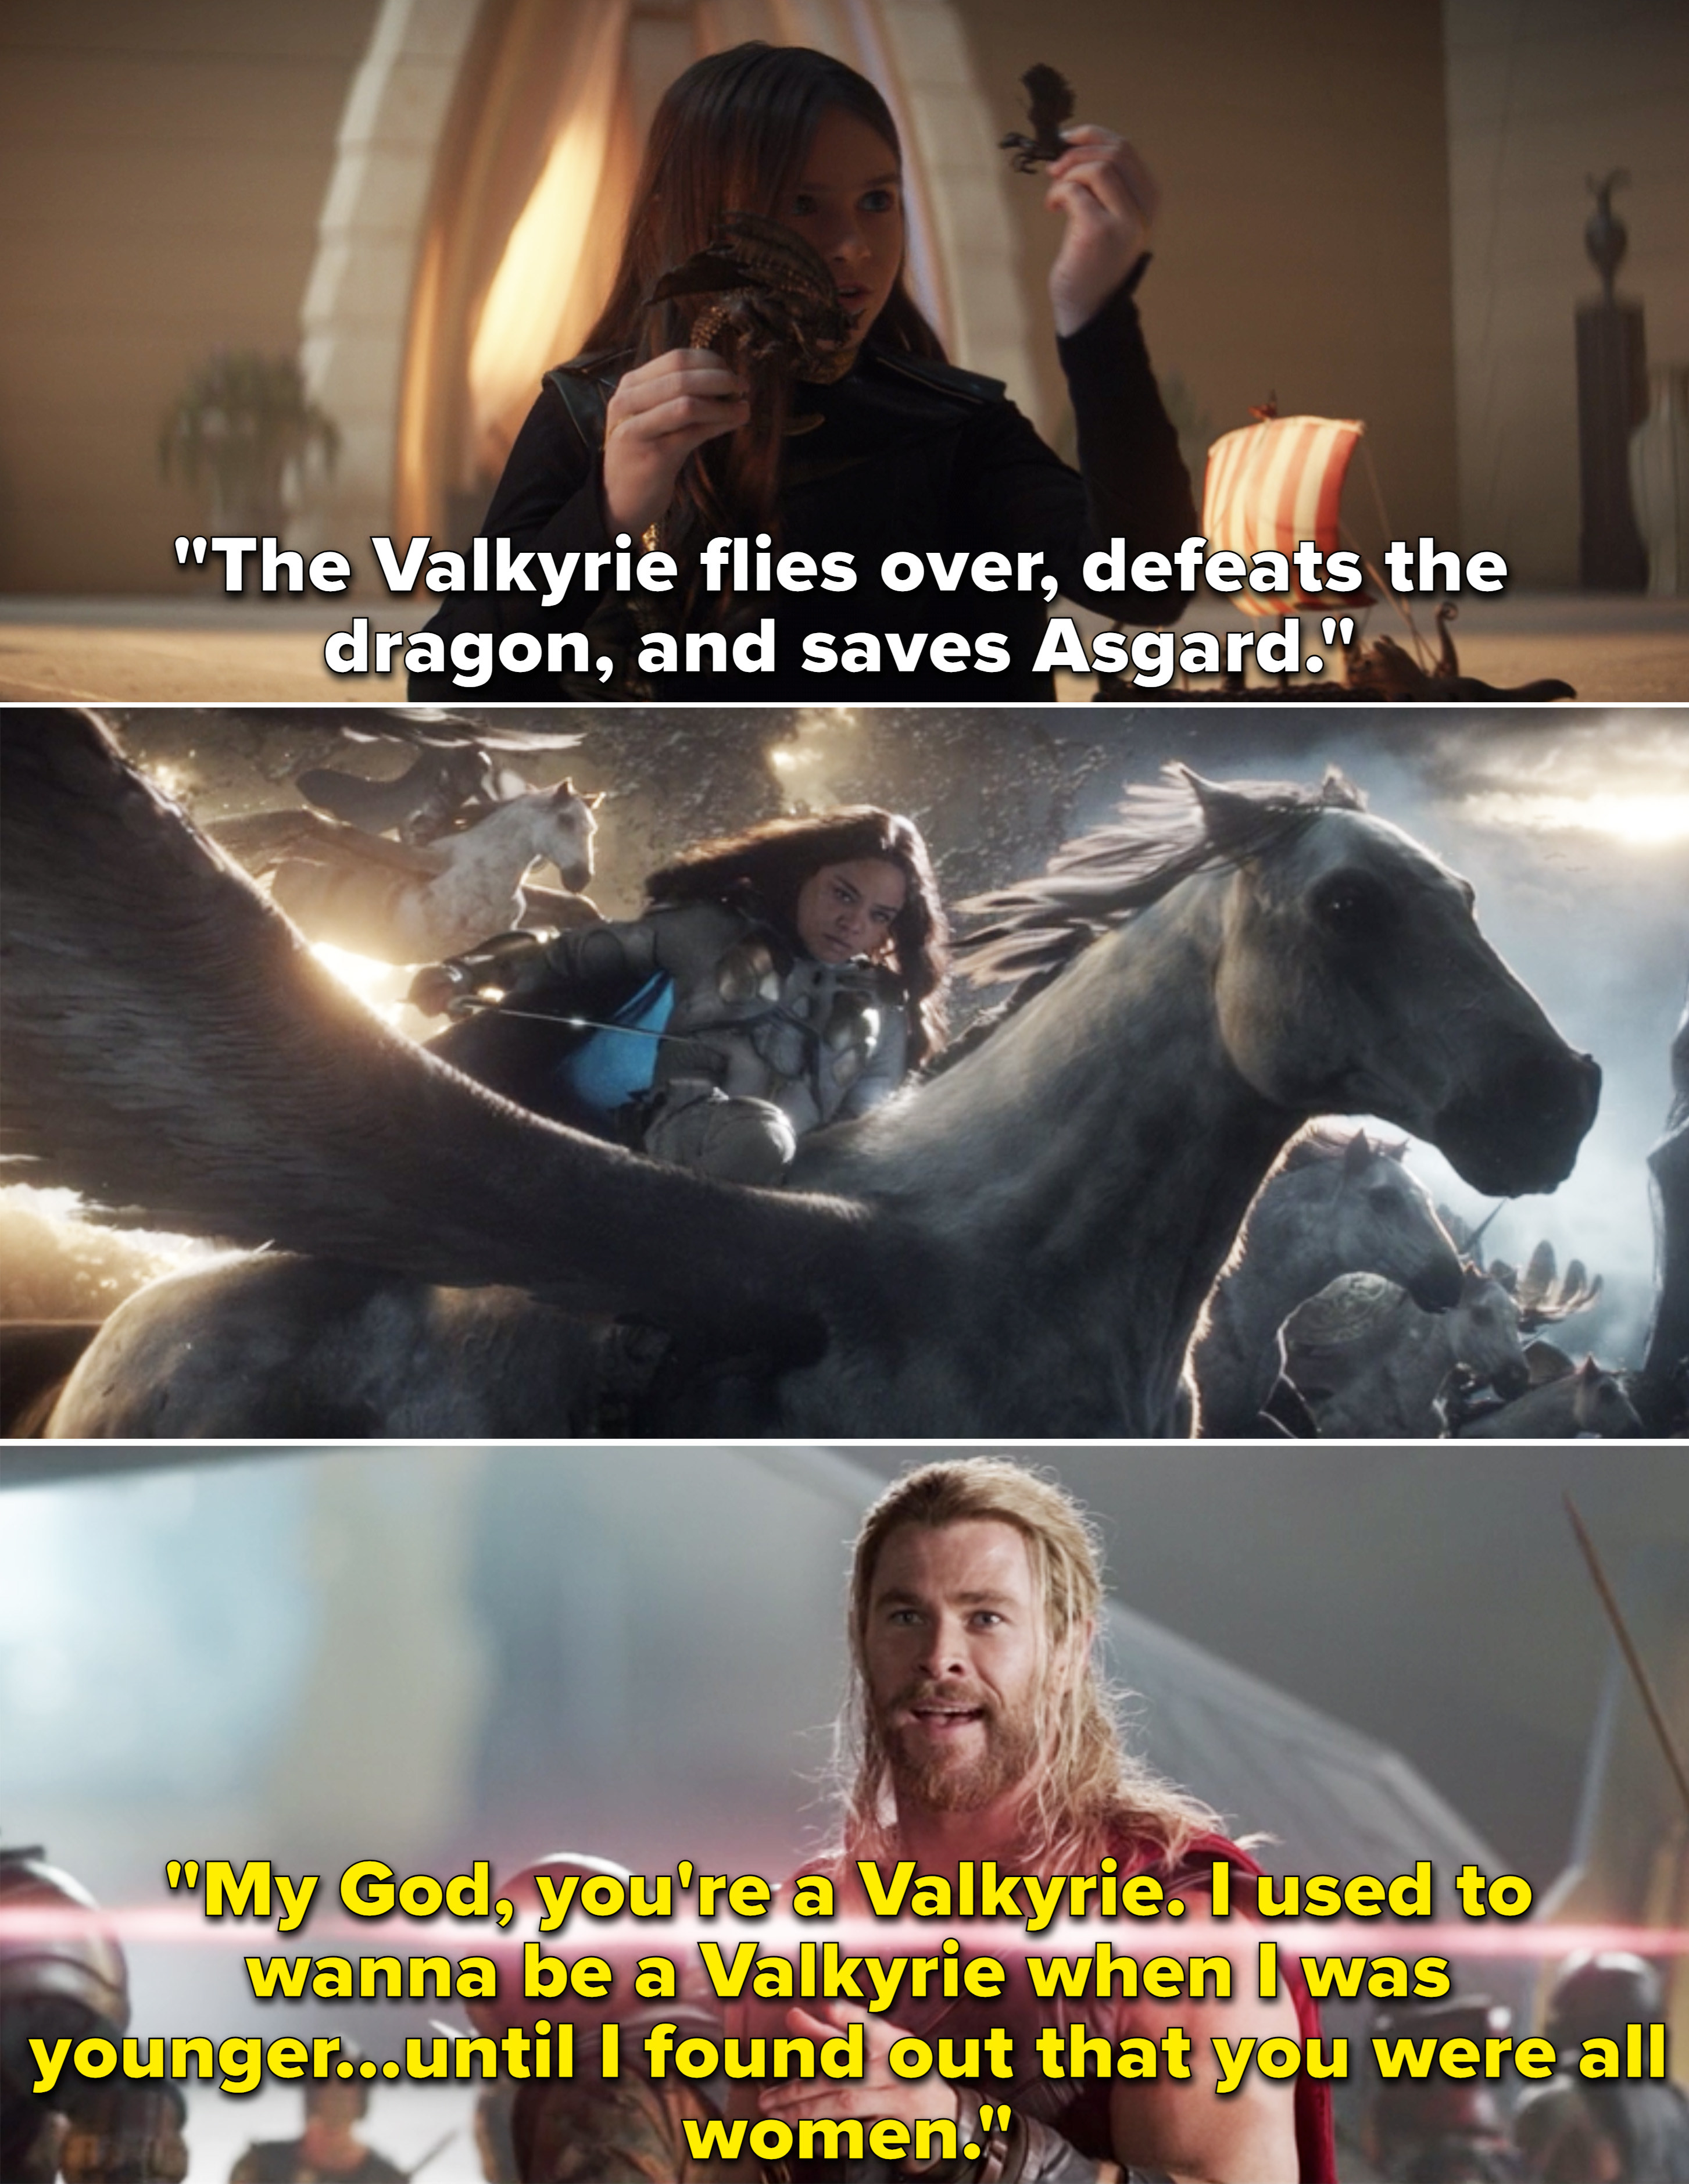 Sylvie saying, &quot;The Valkyrie flies over, defeats the dragon, and saves Asgard&quot; vs Thor saying, &quot;I used to wanna be a Valkyrie when I was younger&quot;